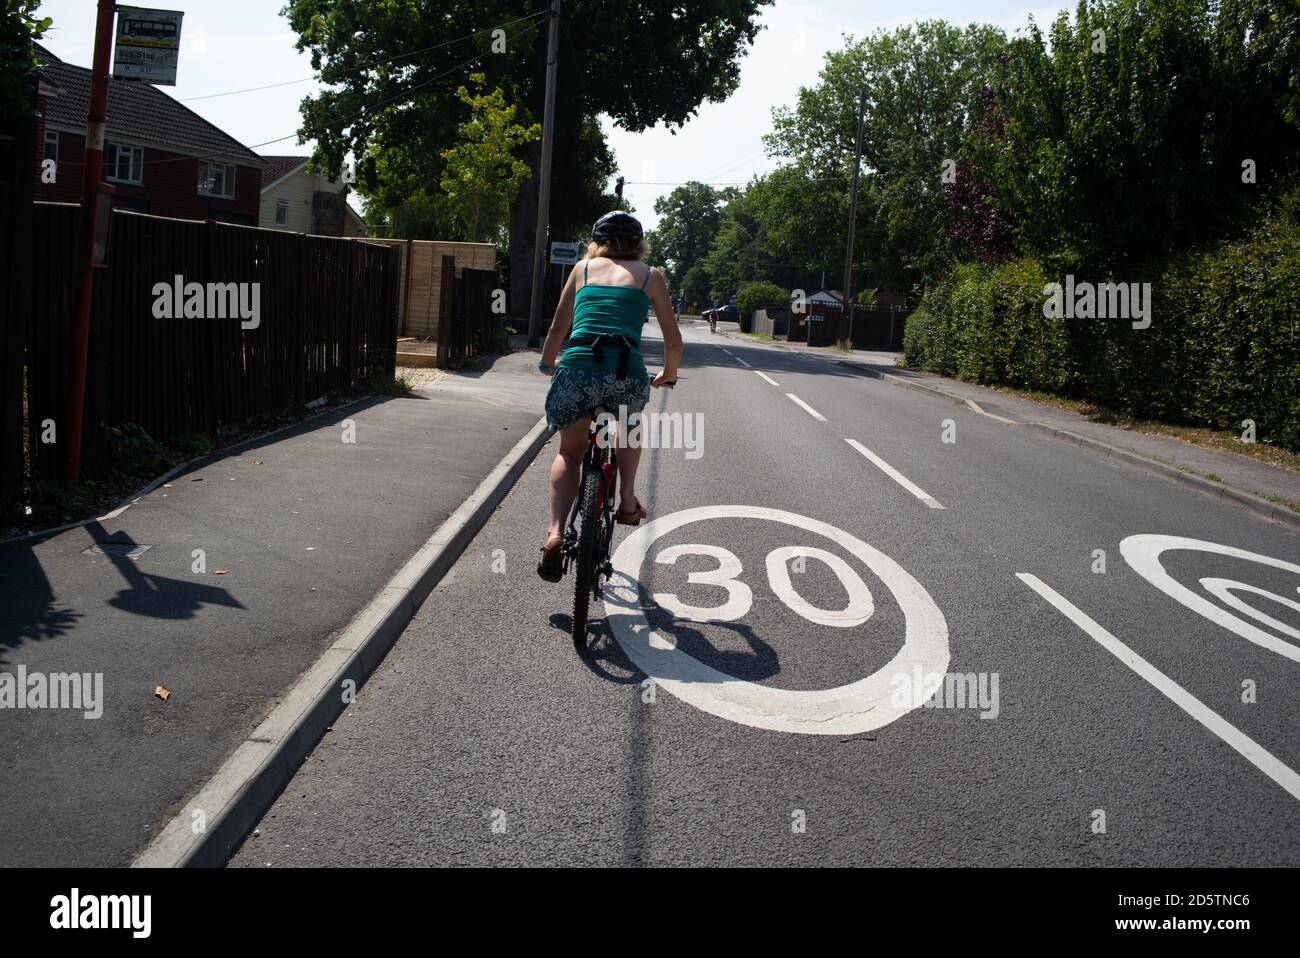 A healthy fit middle-aged women rides bike over a 30mph painted road sign dressed in summer clothing out on a leisure cycle ride. Stock Photo